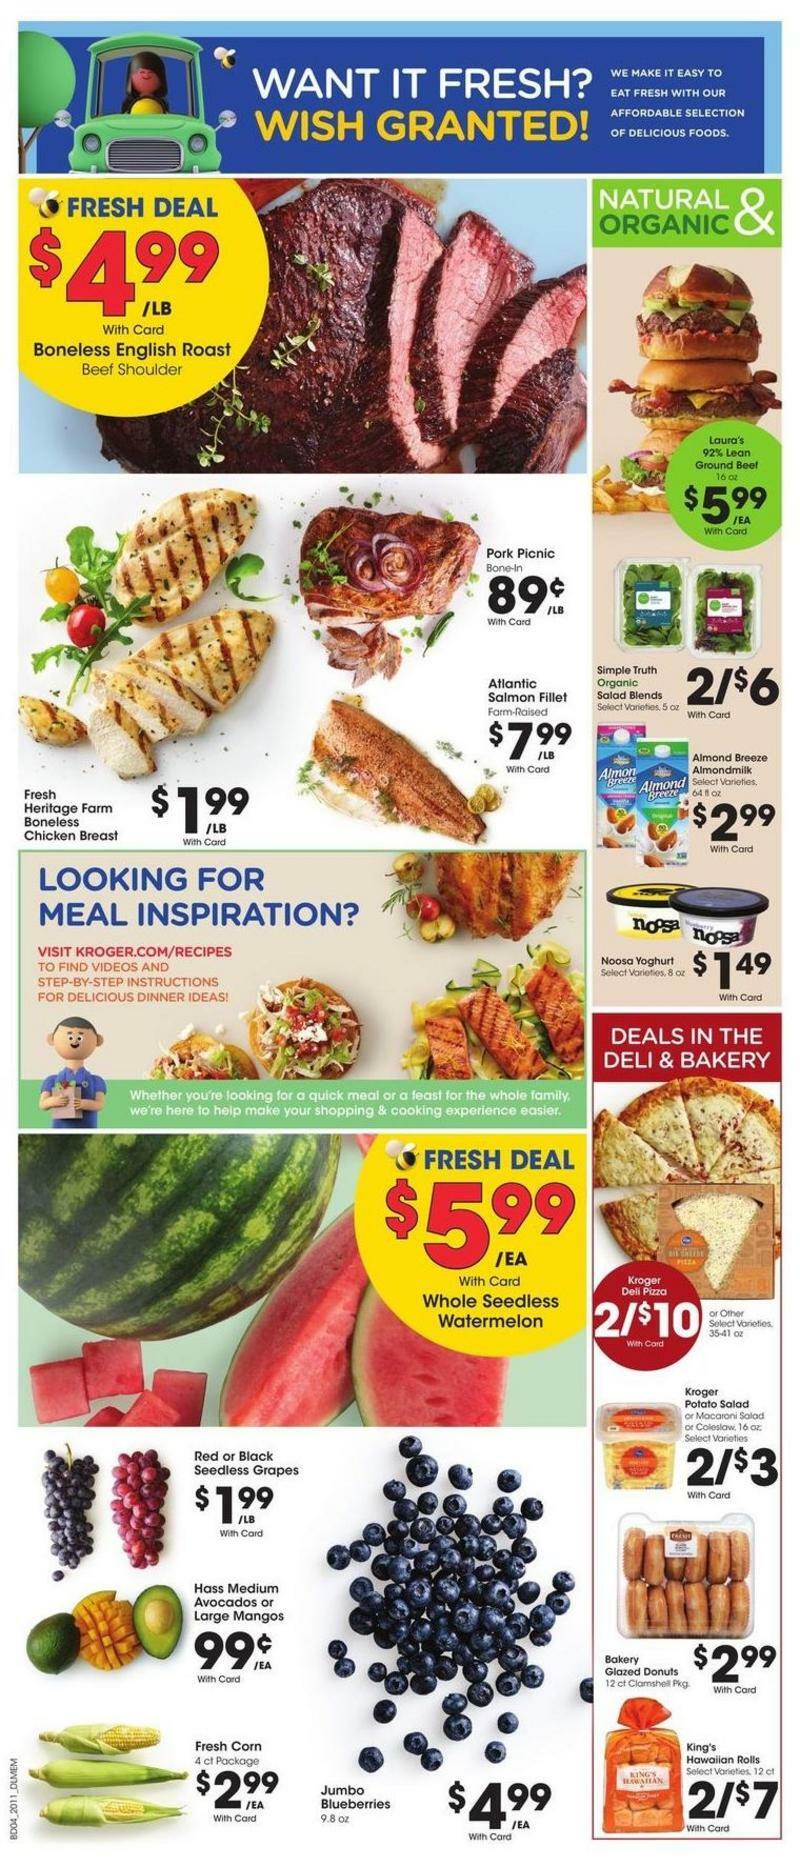 Kroger Weekly Ad from April 15